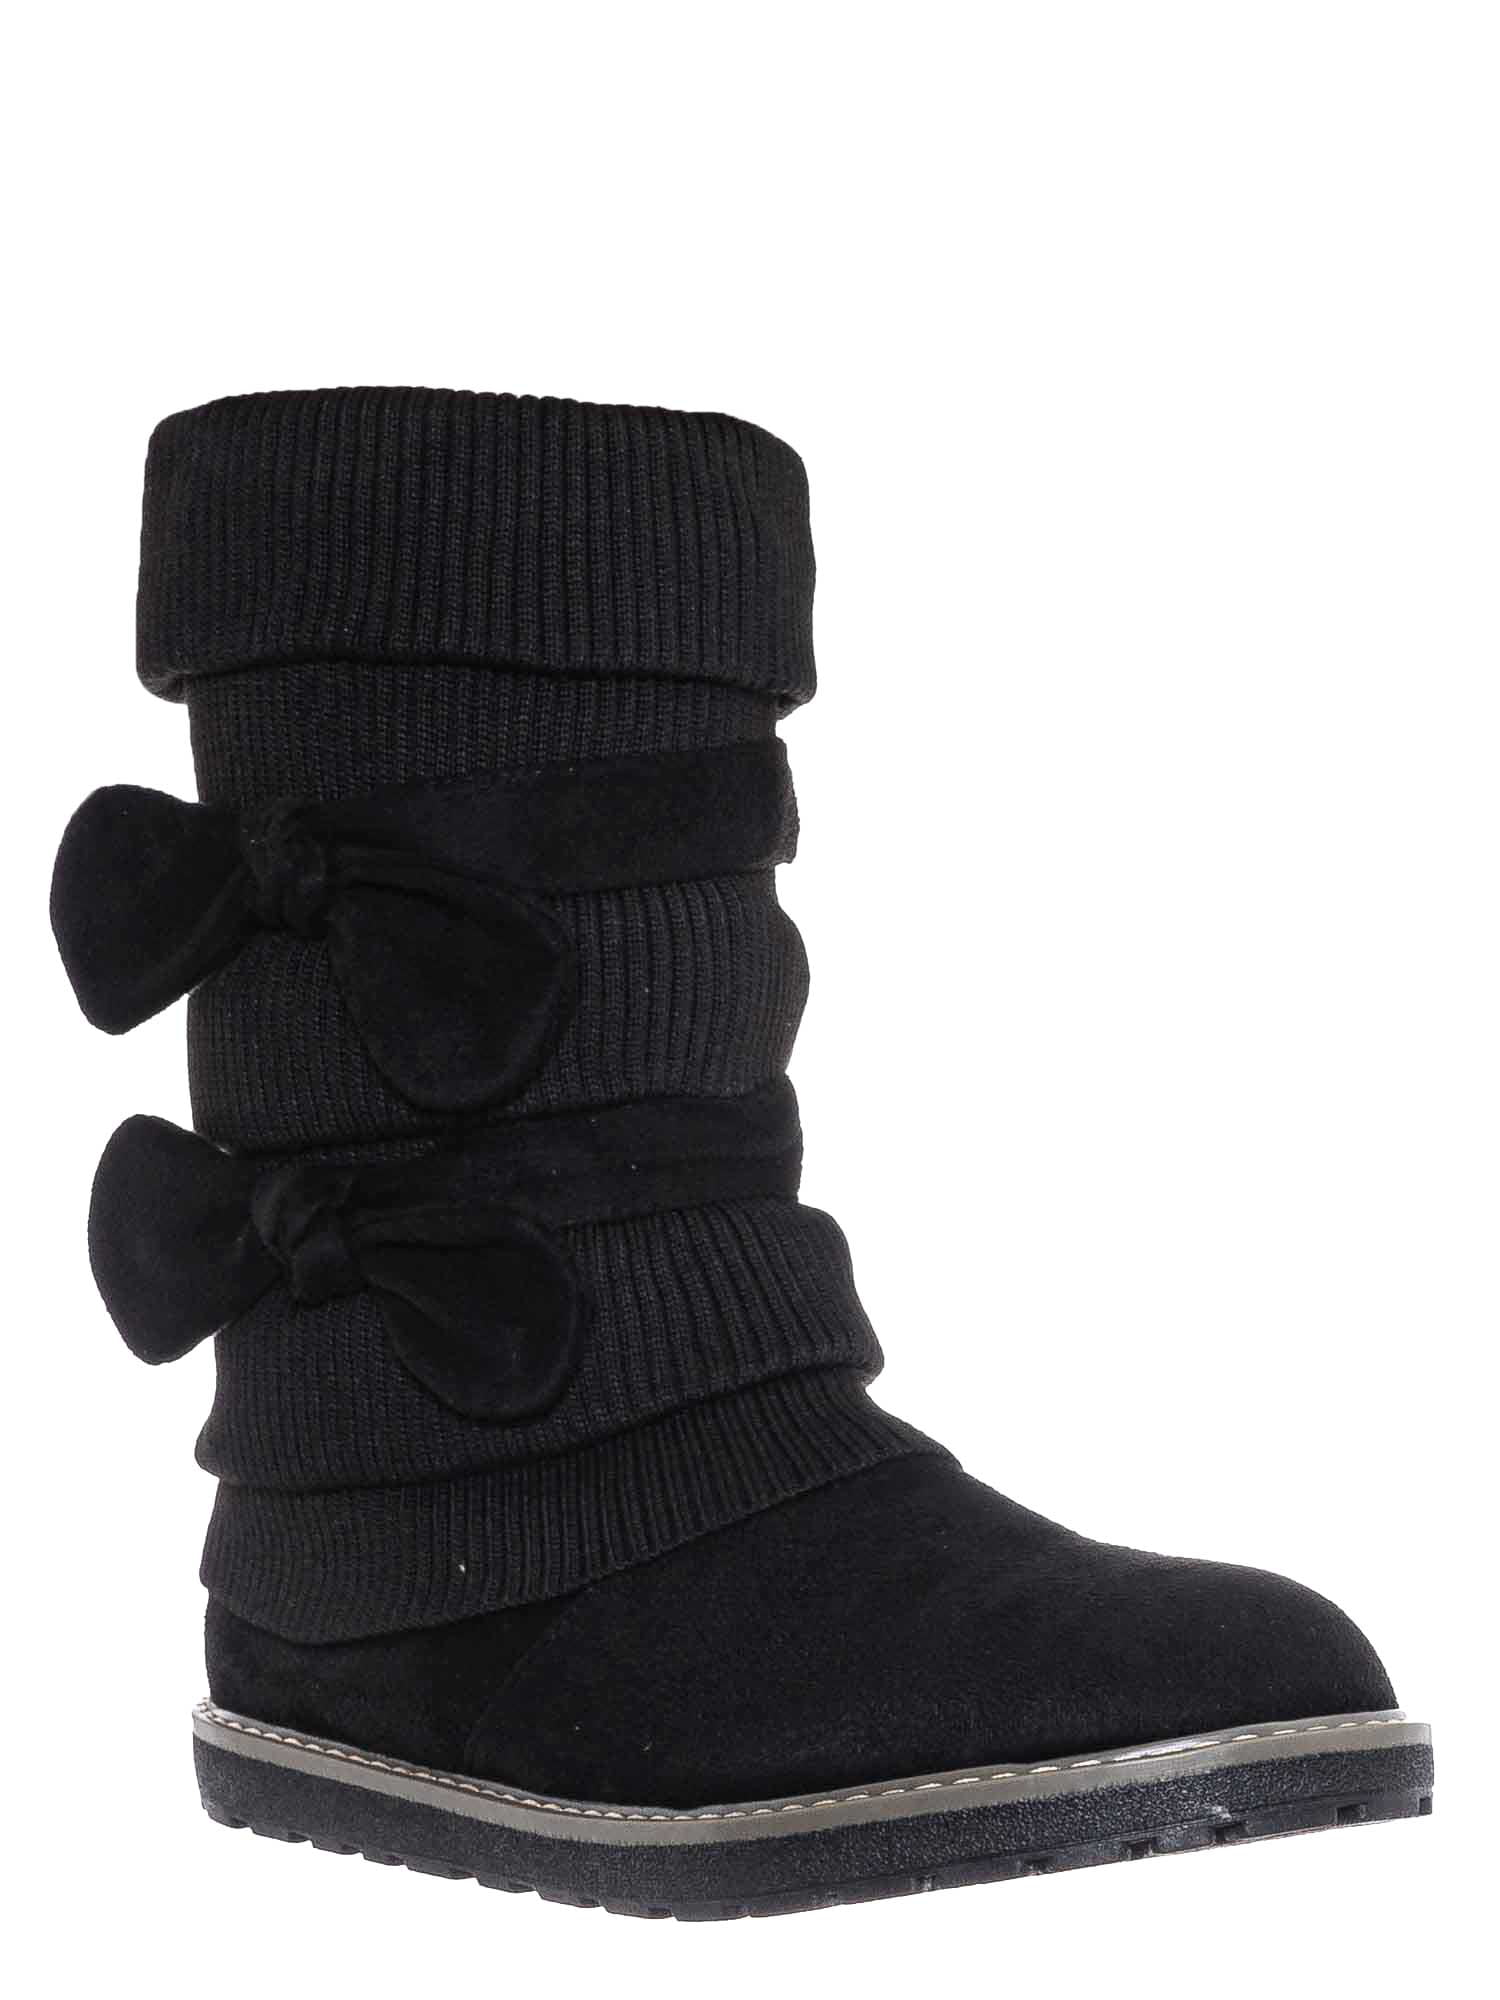 Girls Black Long Winter Faux Suede Kids Children's Black Zip Up Rouched Boots UK 